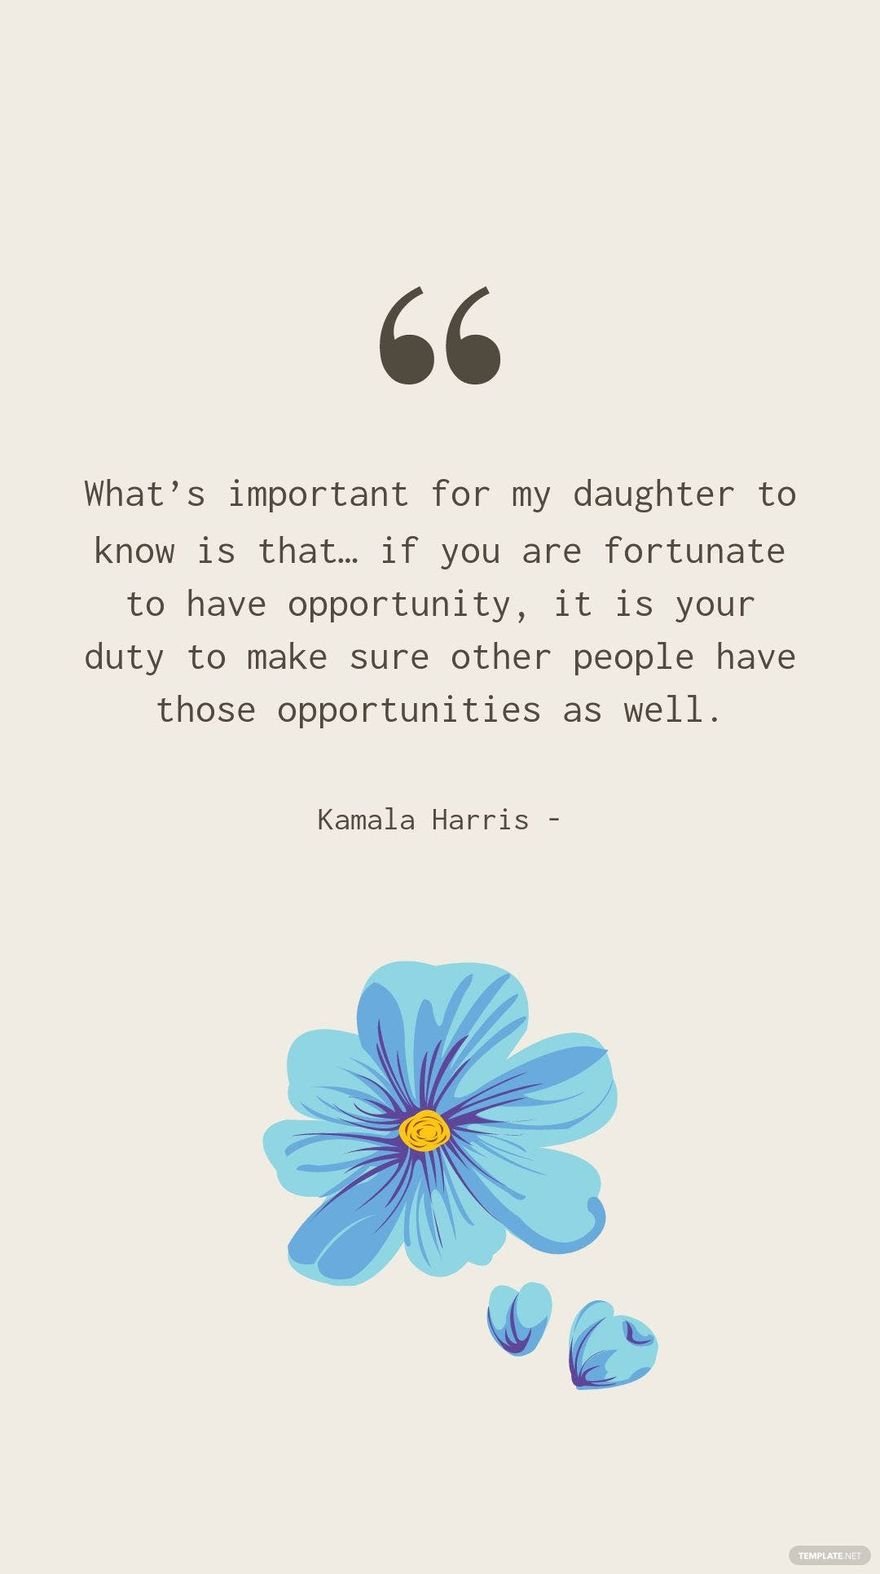 KAMALA HARRIS - What’s important for my daughter to know is that… if you are fortunate to have opportunity, it is your duty to make sure other people have those opportunities as well.